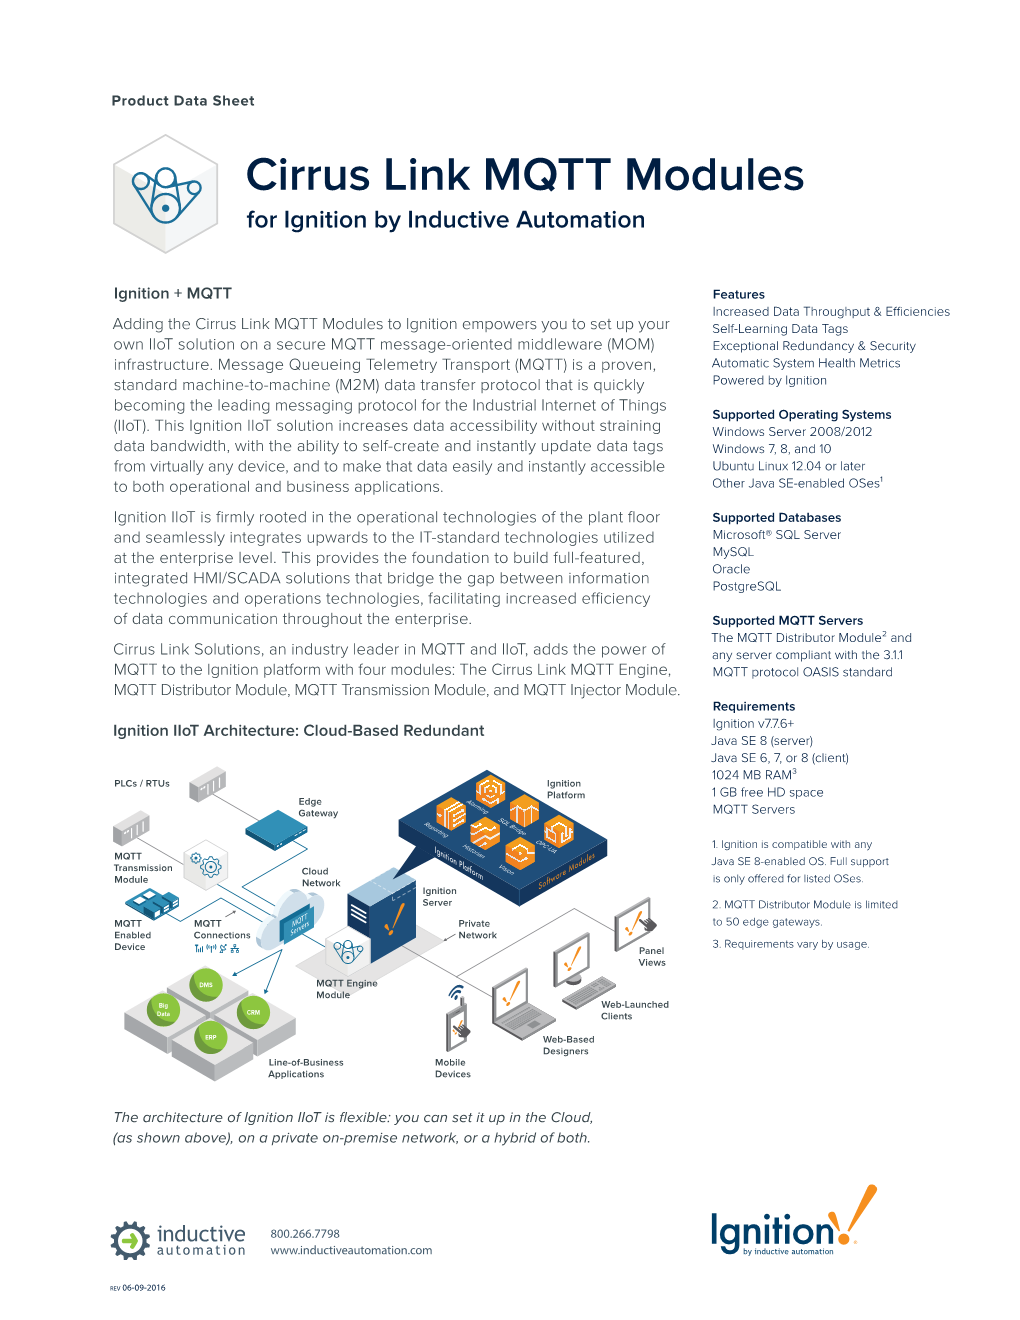 Cirrus Link MQTT Modules for Ignition by Inductive Automation